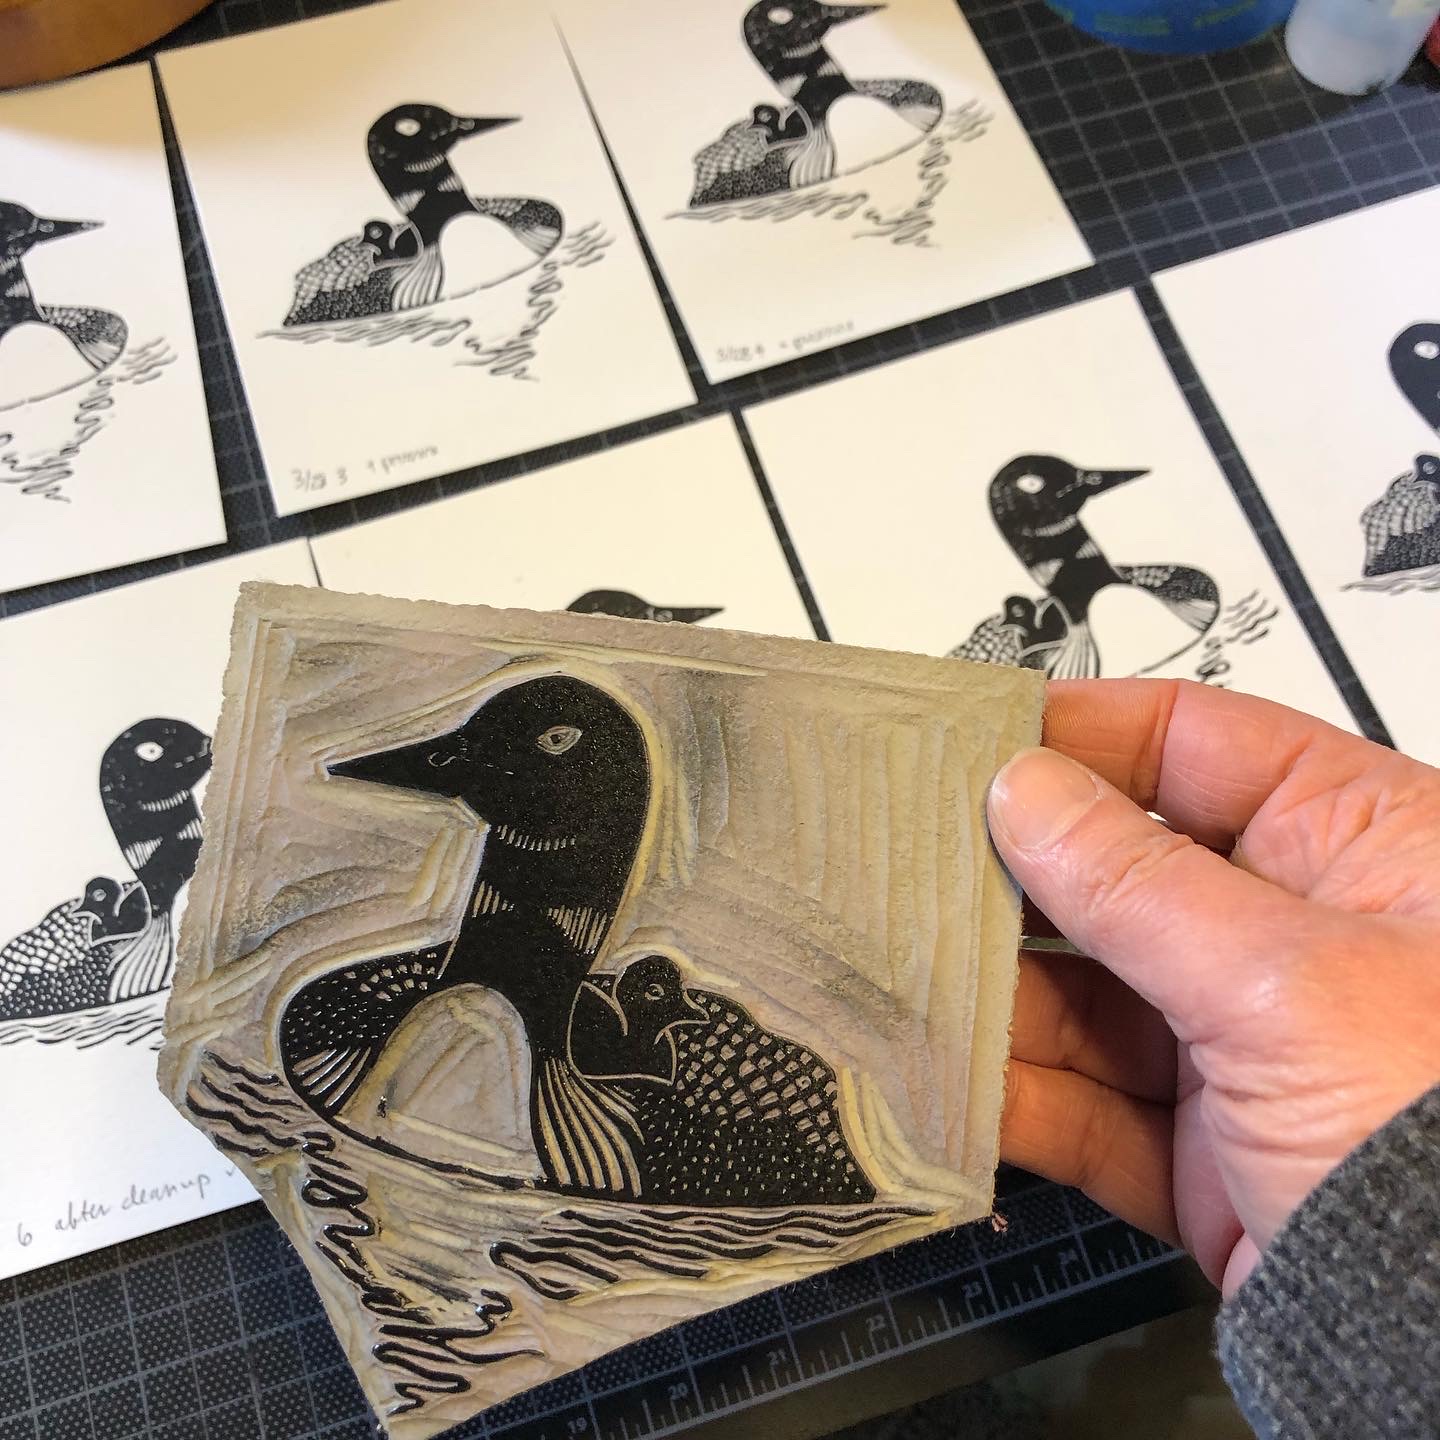 Several loon cards in progress arrayed on a table. In the foreground Shanna’s hand is holding the linked linoleum block from which the cards are printed.